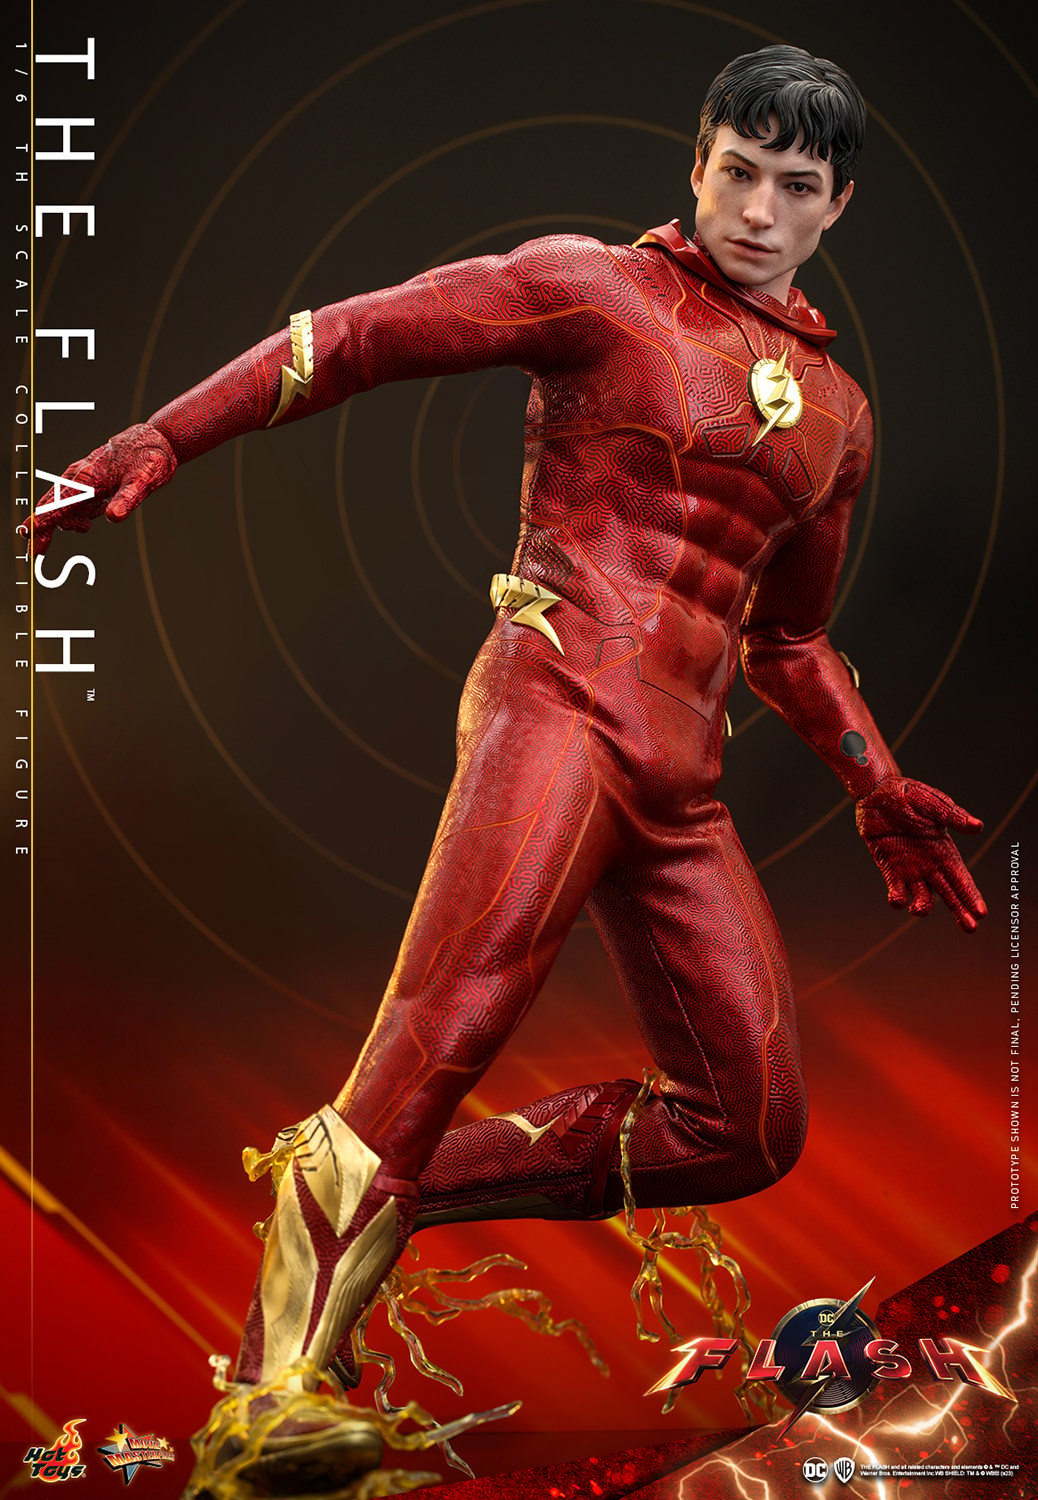 The Flash (Special Edition) (Prototype Shown) View 5